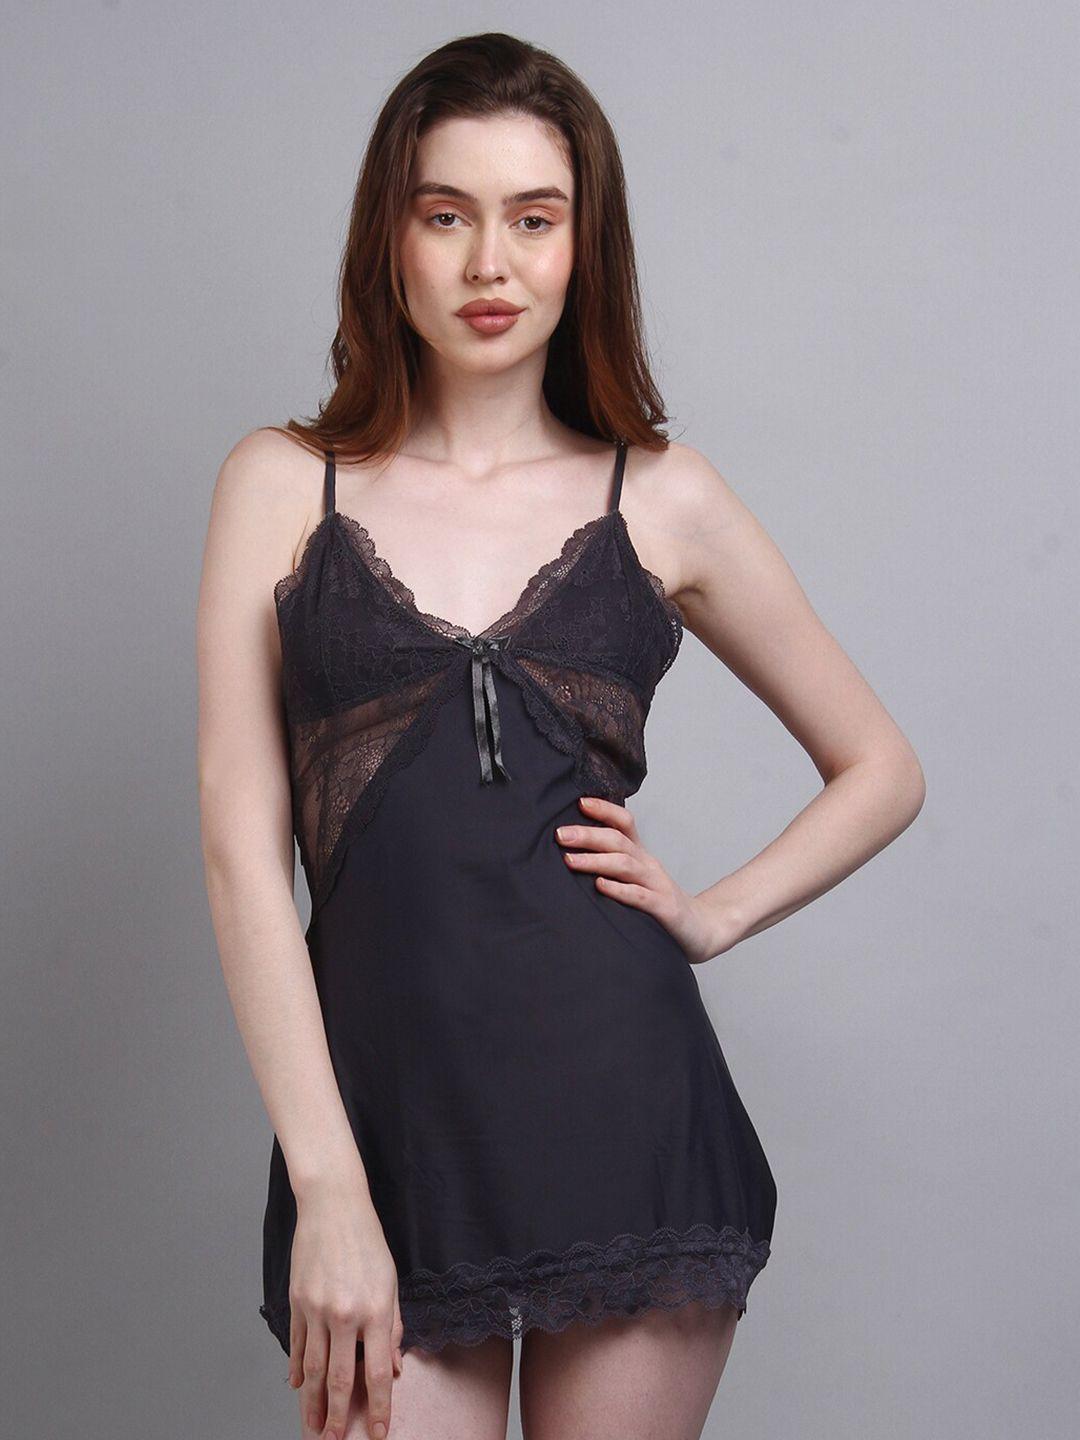 herryqeal shoulder straps with lace soft stretchable & comfortable baby doll